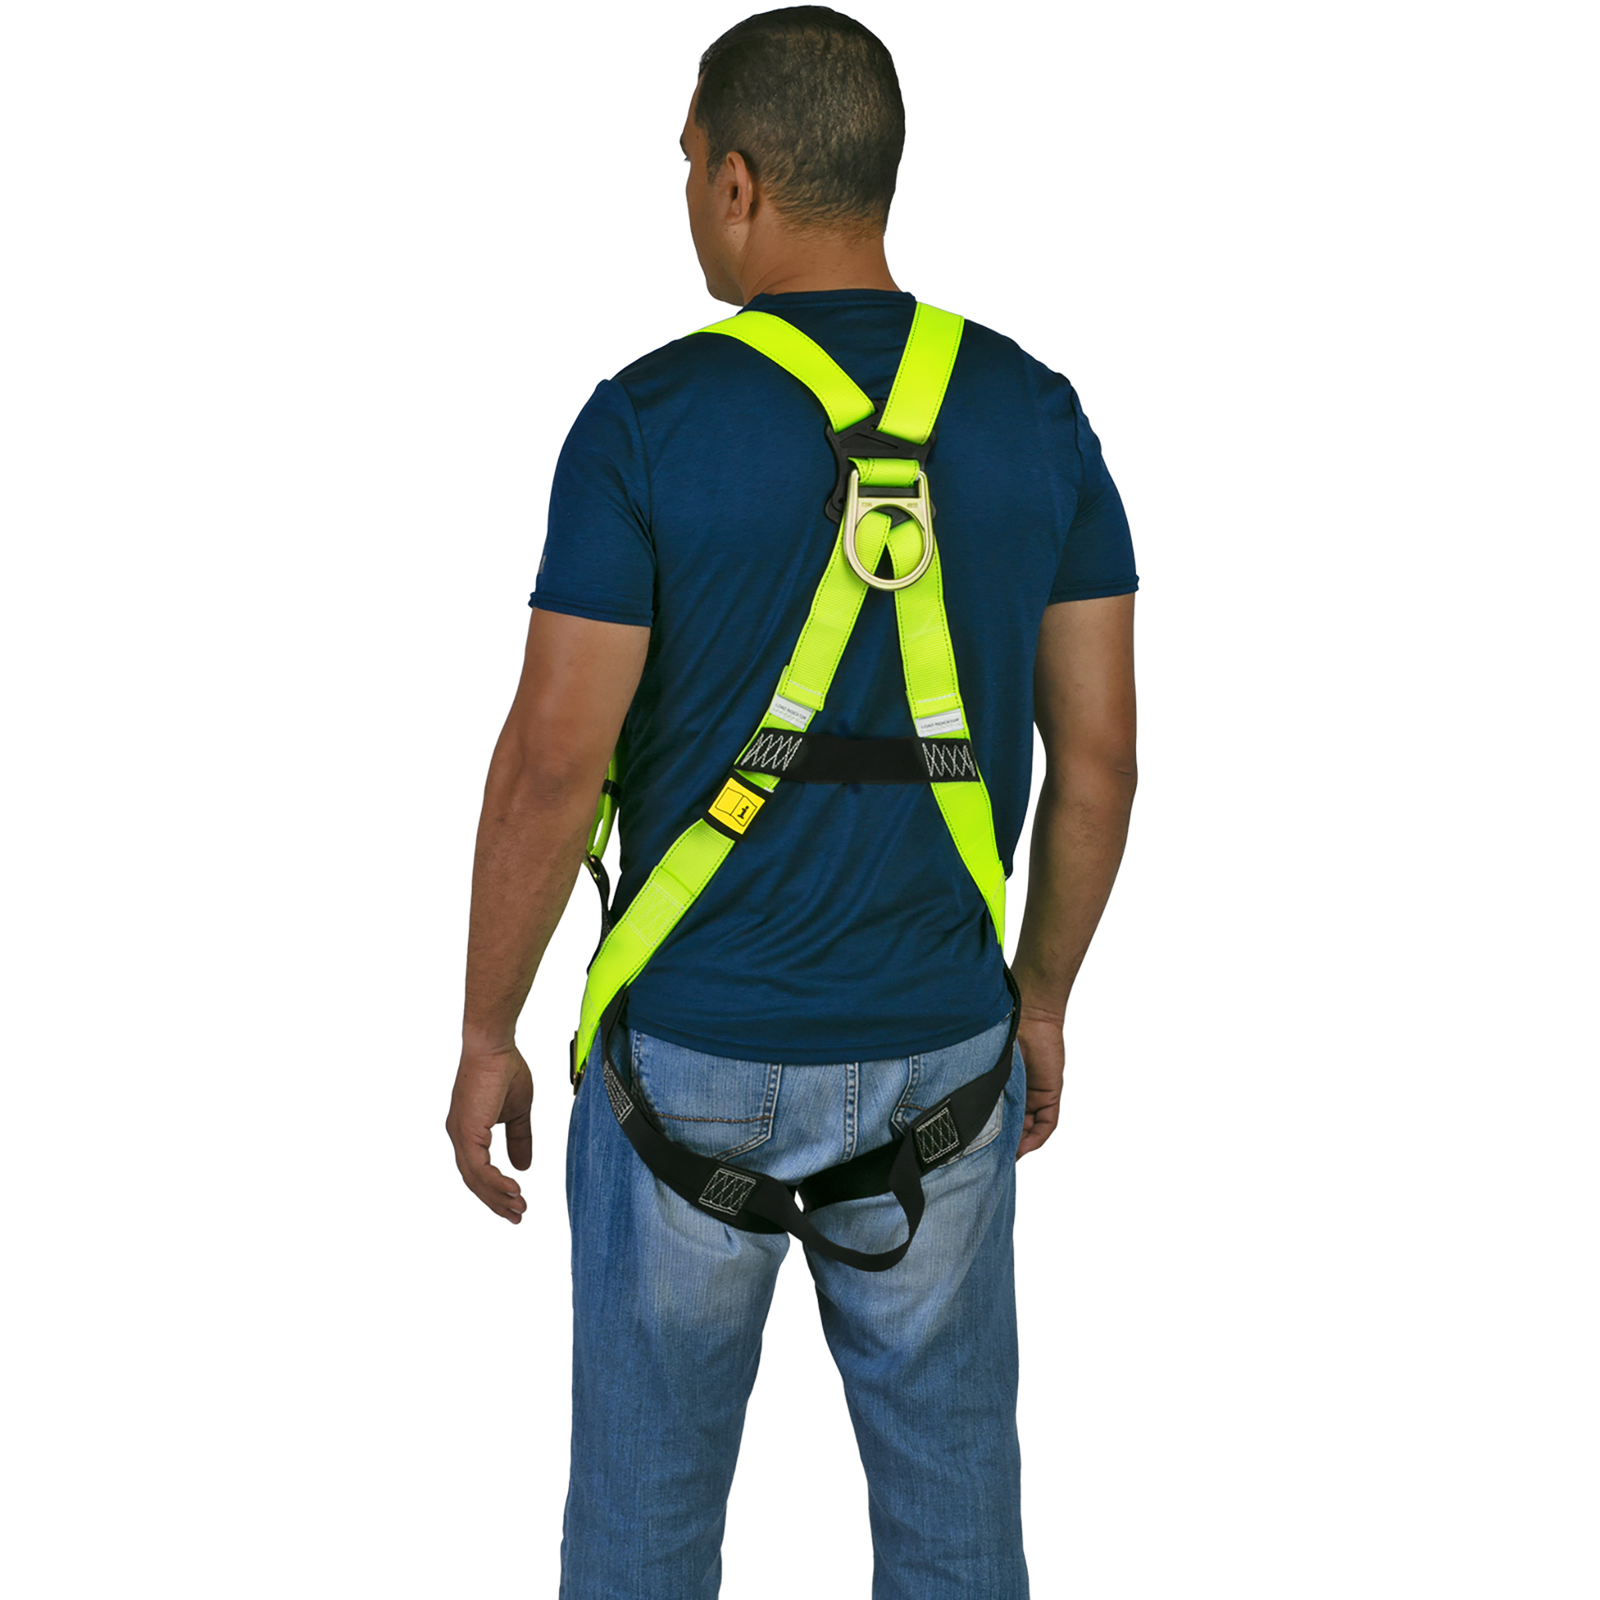 Back view of a person wearing the hi-vis yellow and black 1D fall protection safety body JORESTECH harness